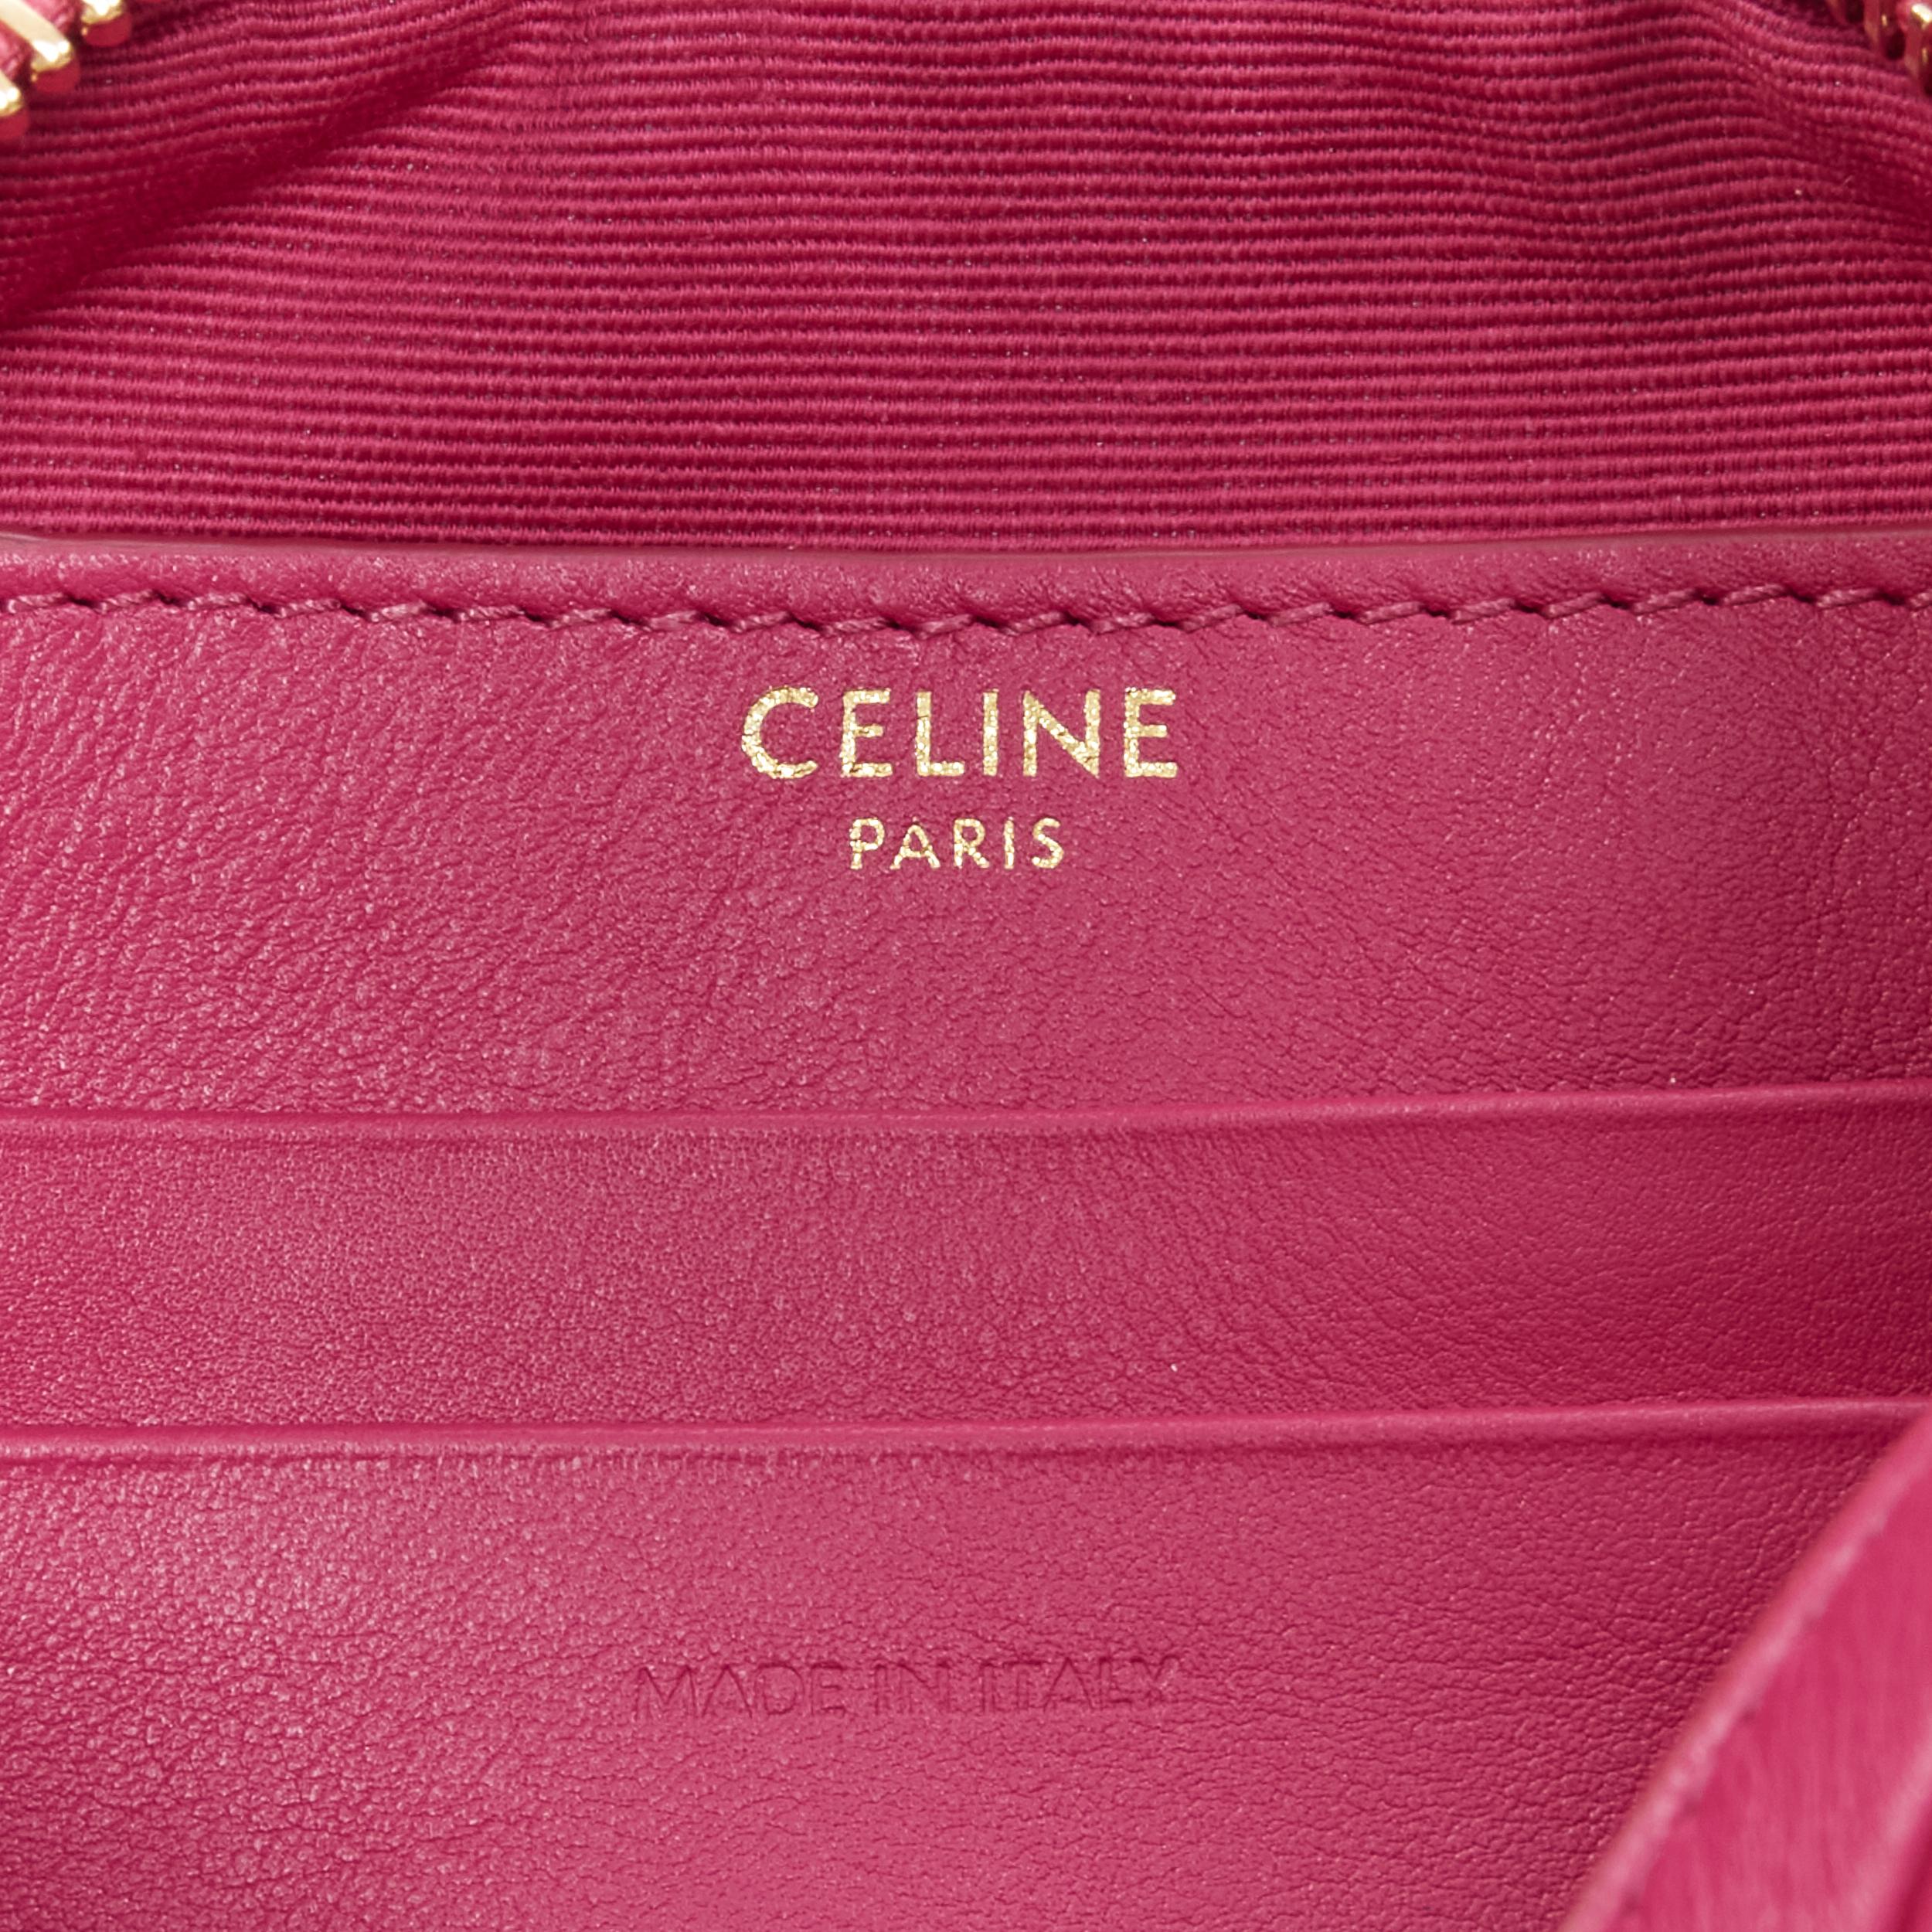 new CELINE Hedi Slimane 2019 C Charm red quilted small crossbody camera bag For Sale 3